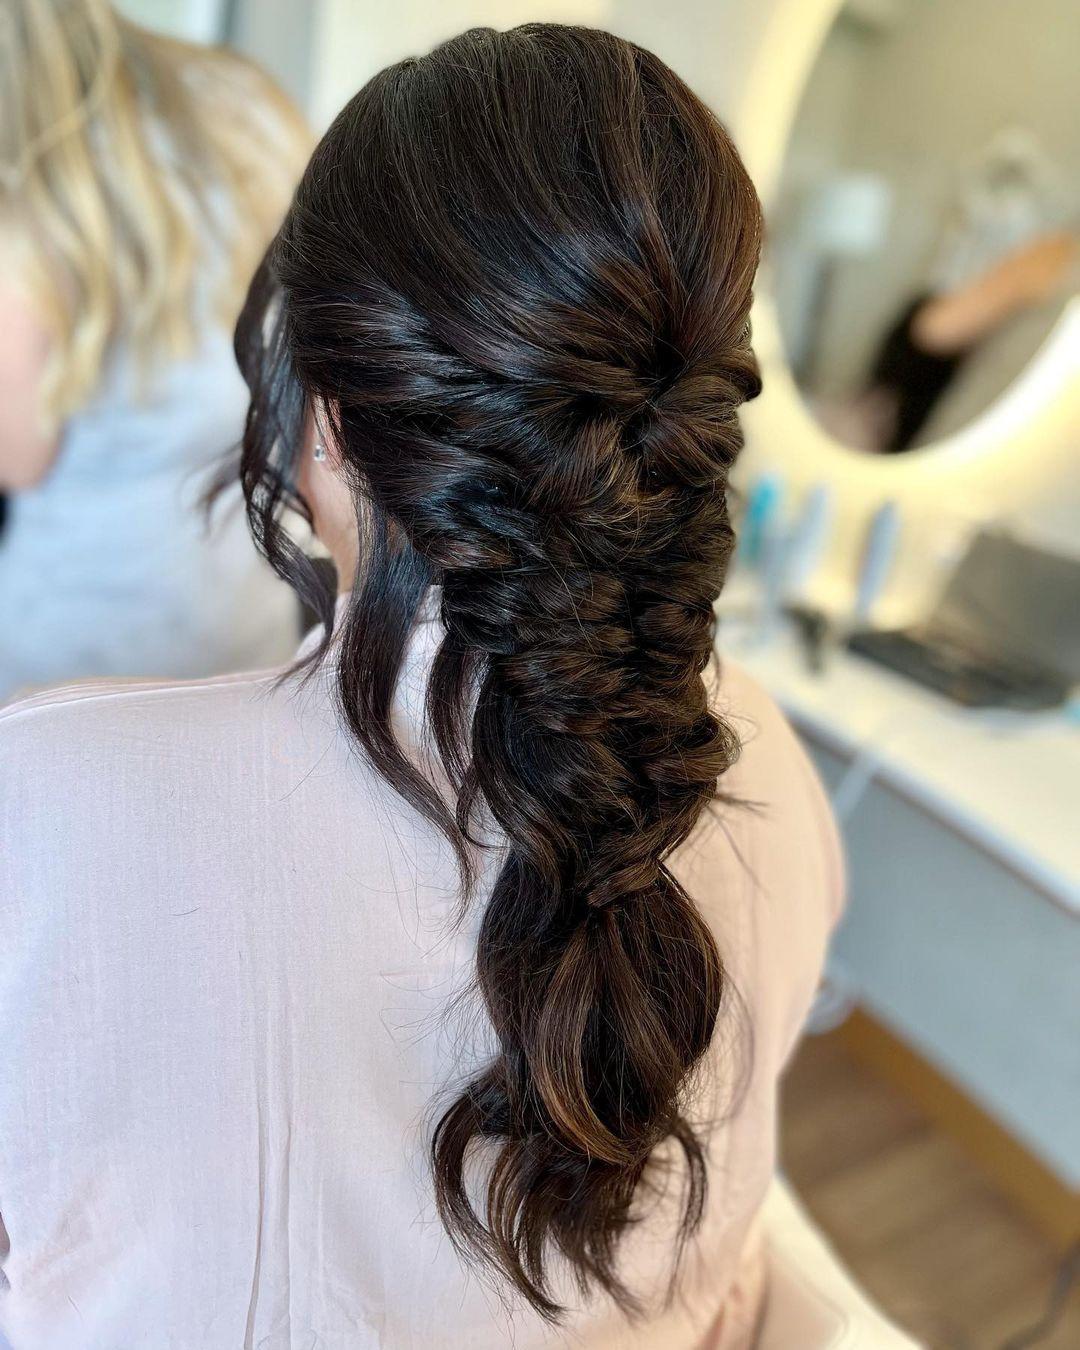 Get stylish in just five minutes with these 3 braid hairstyles | Lifestyle  News – India TV